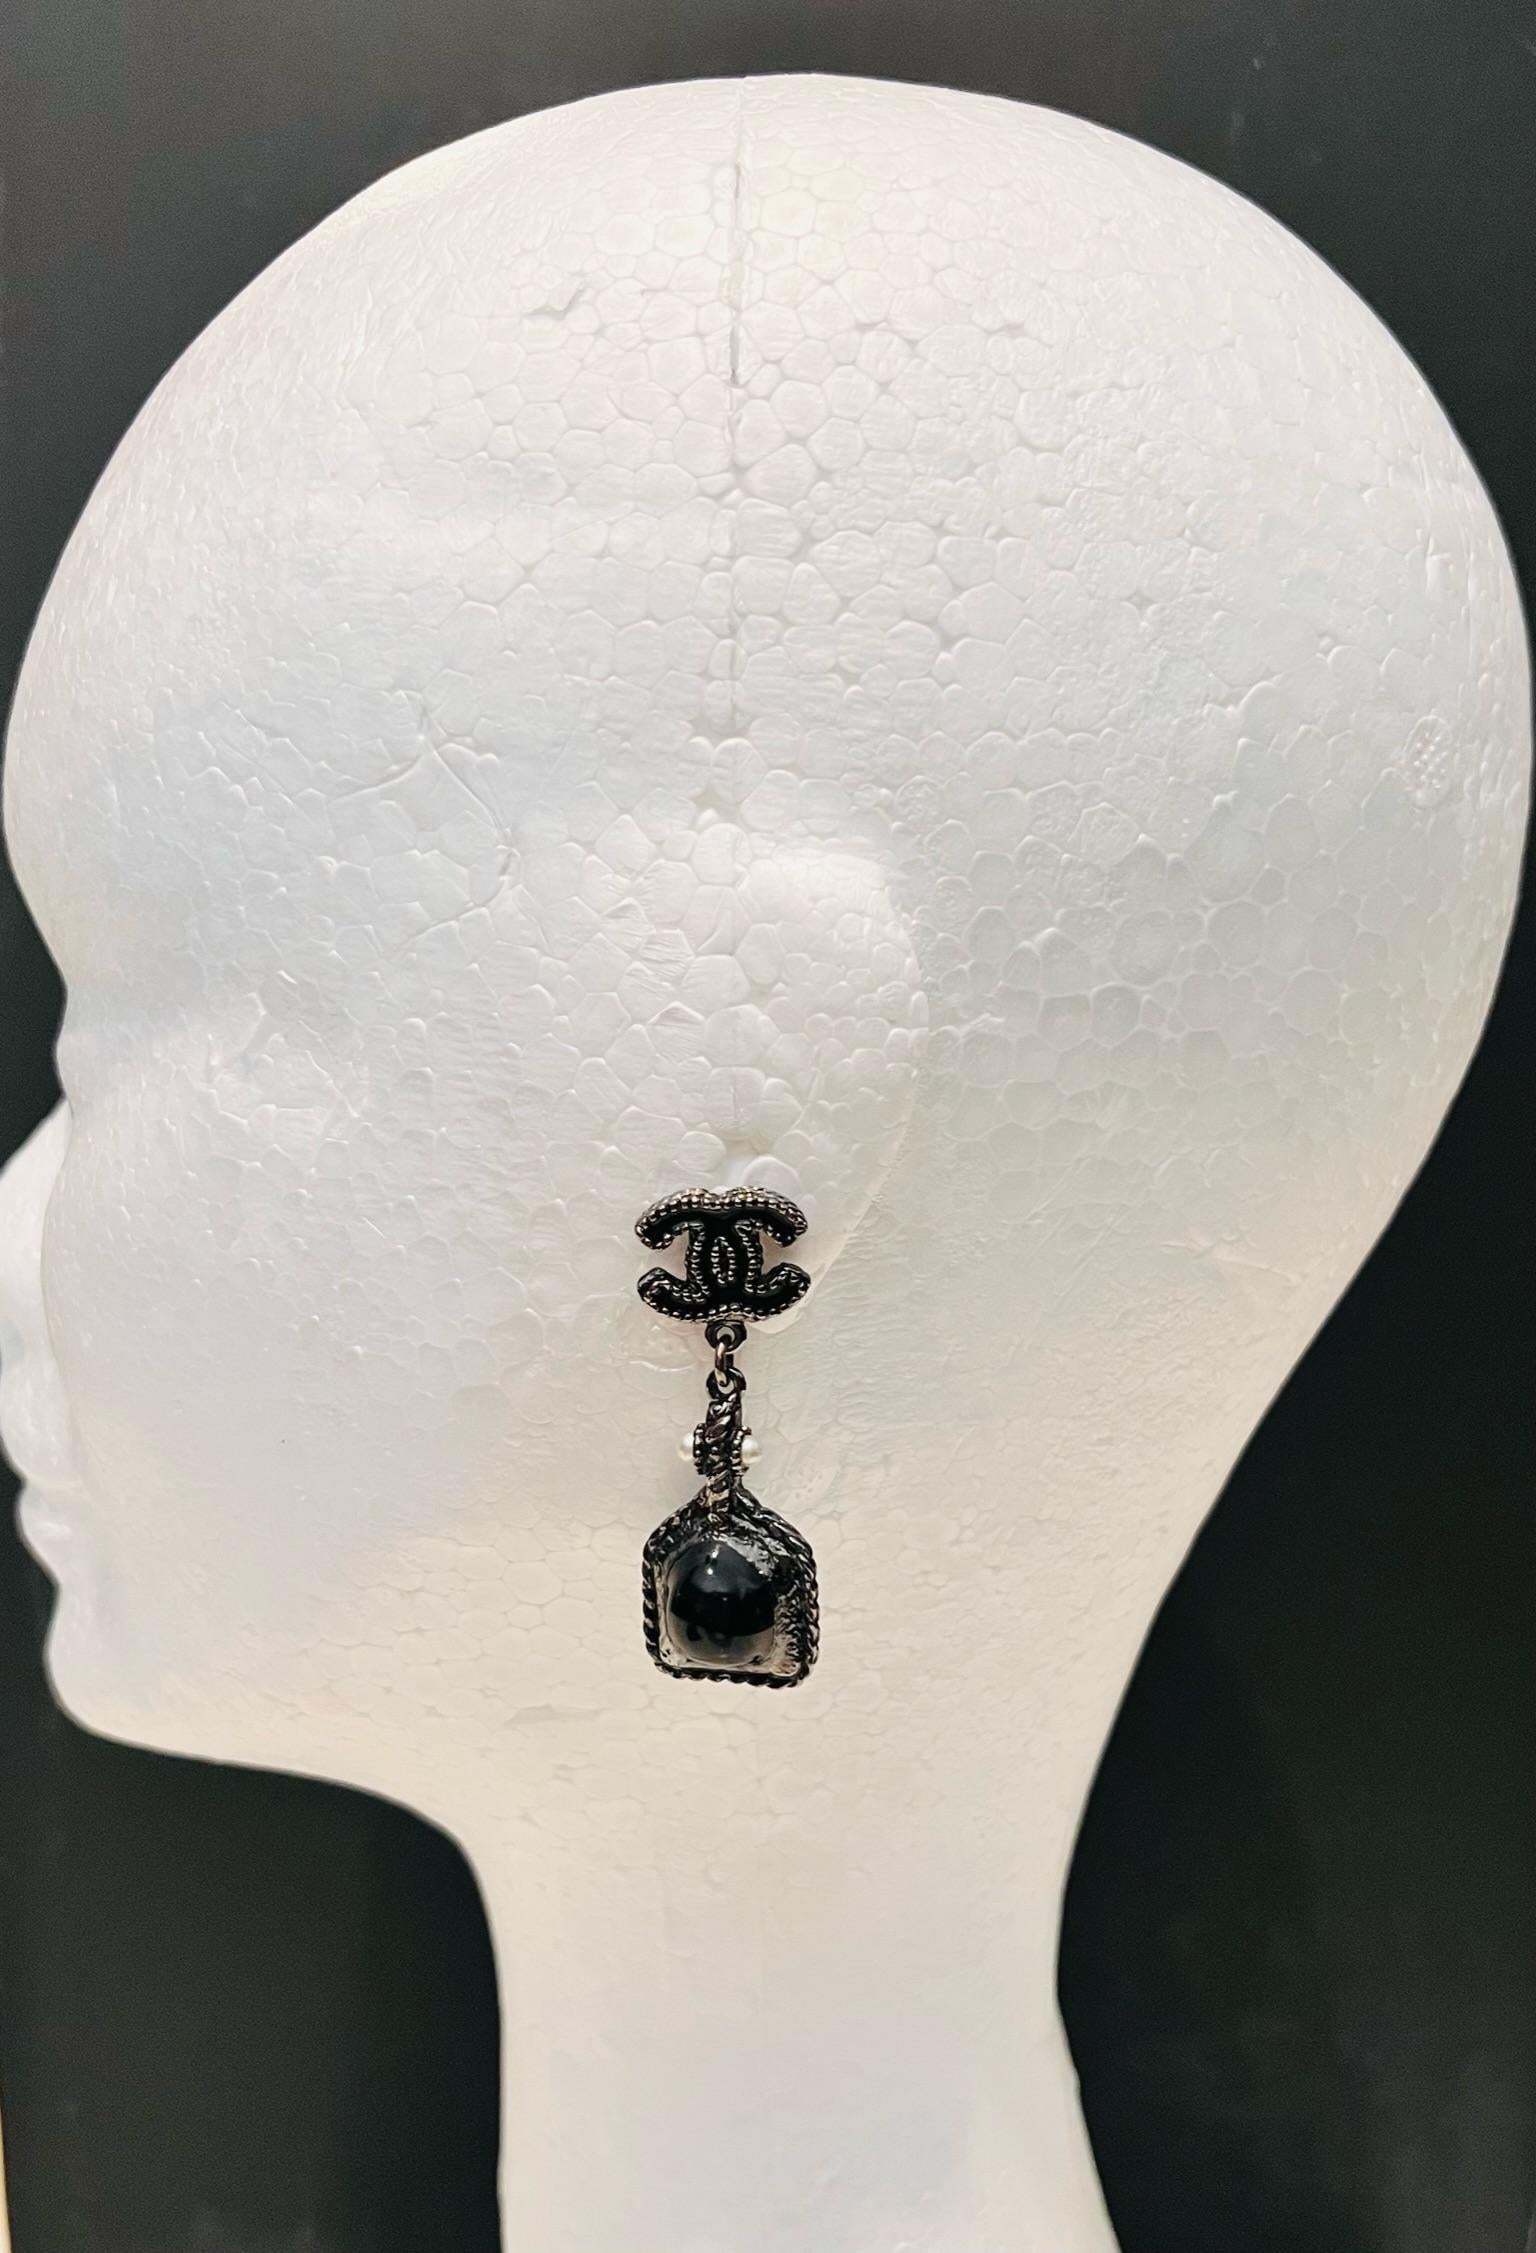 Stunning CHANEL Black and Pearl drop earrings. Features iconic CC logo.

Comes with original box. 